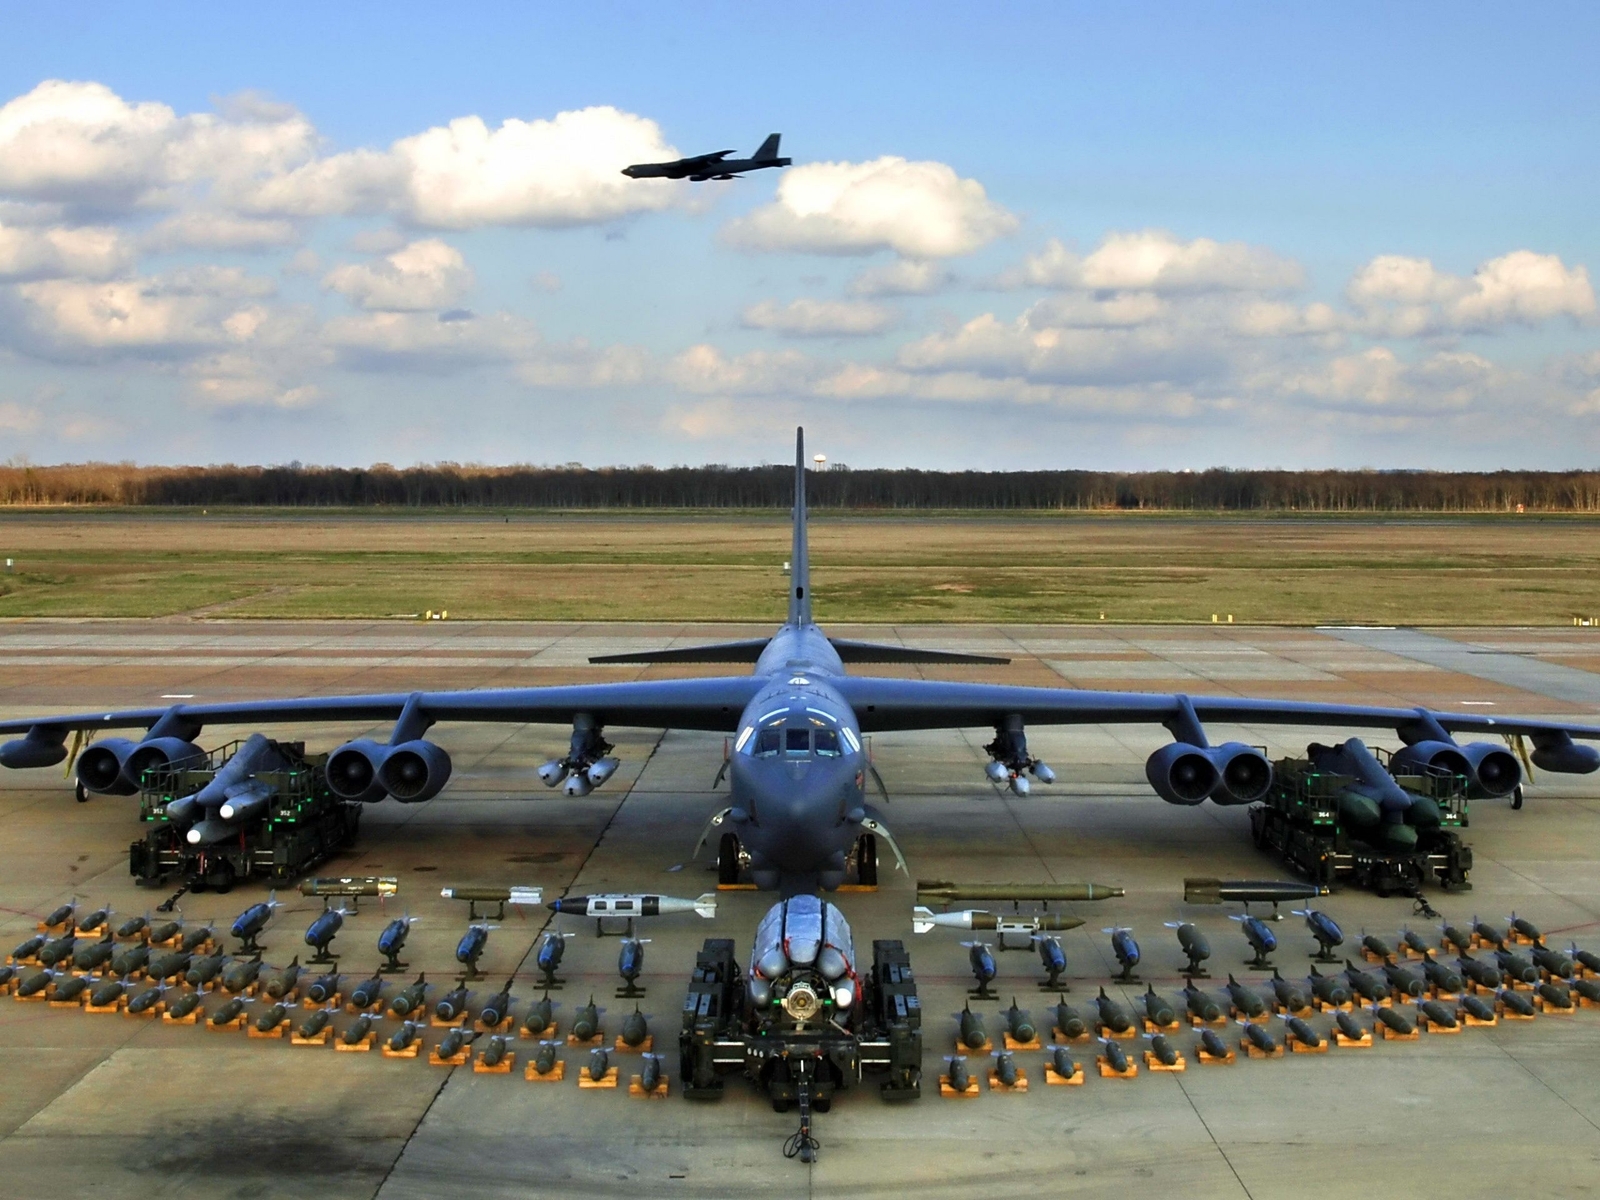 Image: Boeing, Boeing B-52, aircraft, airplane, bomber, munitions, missiles